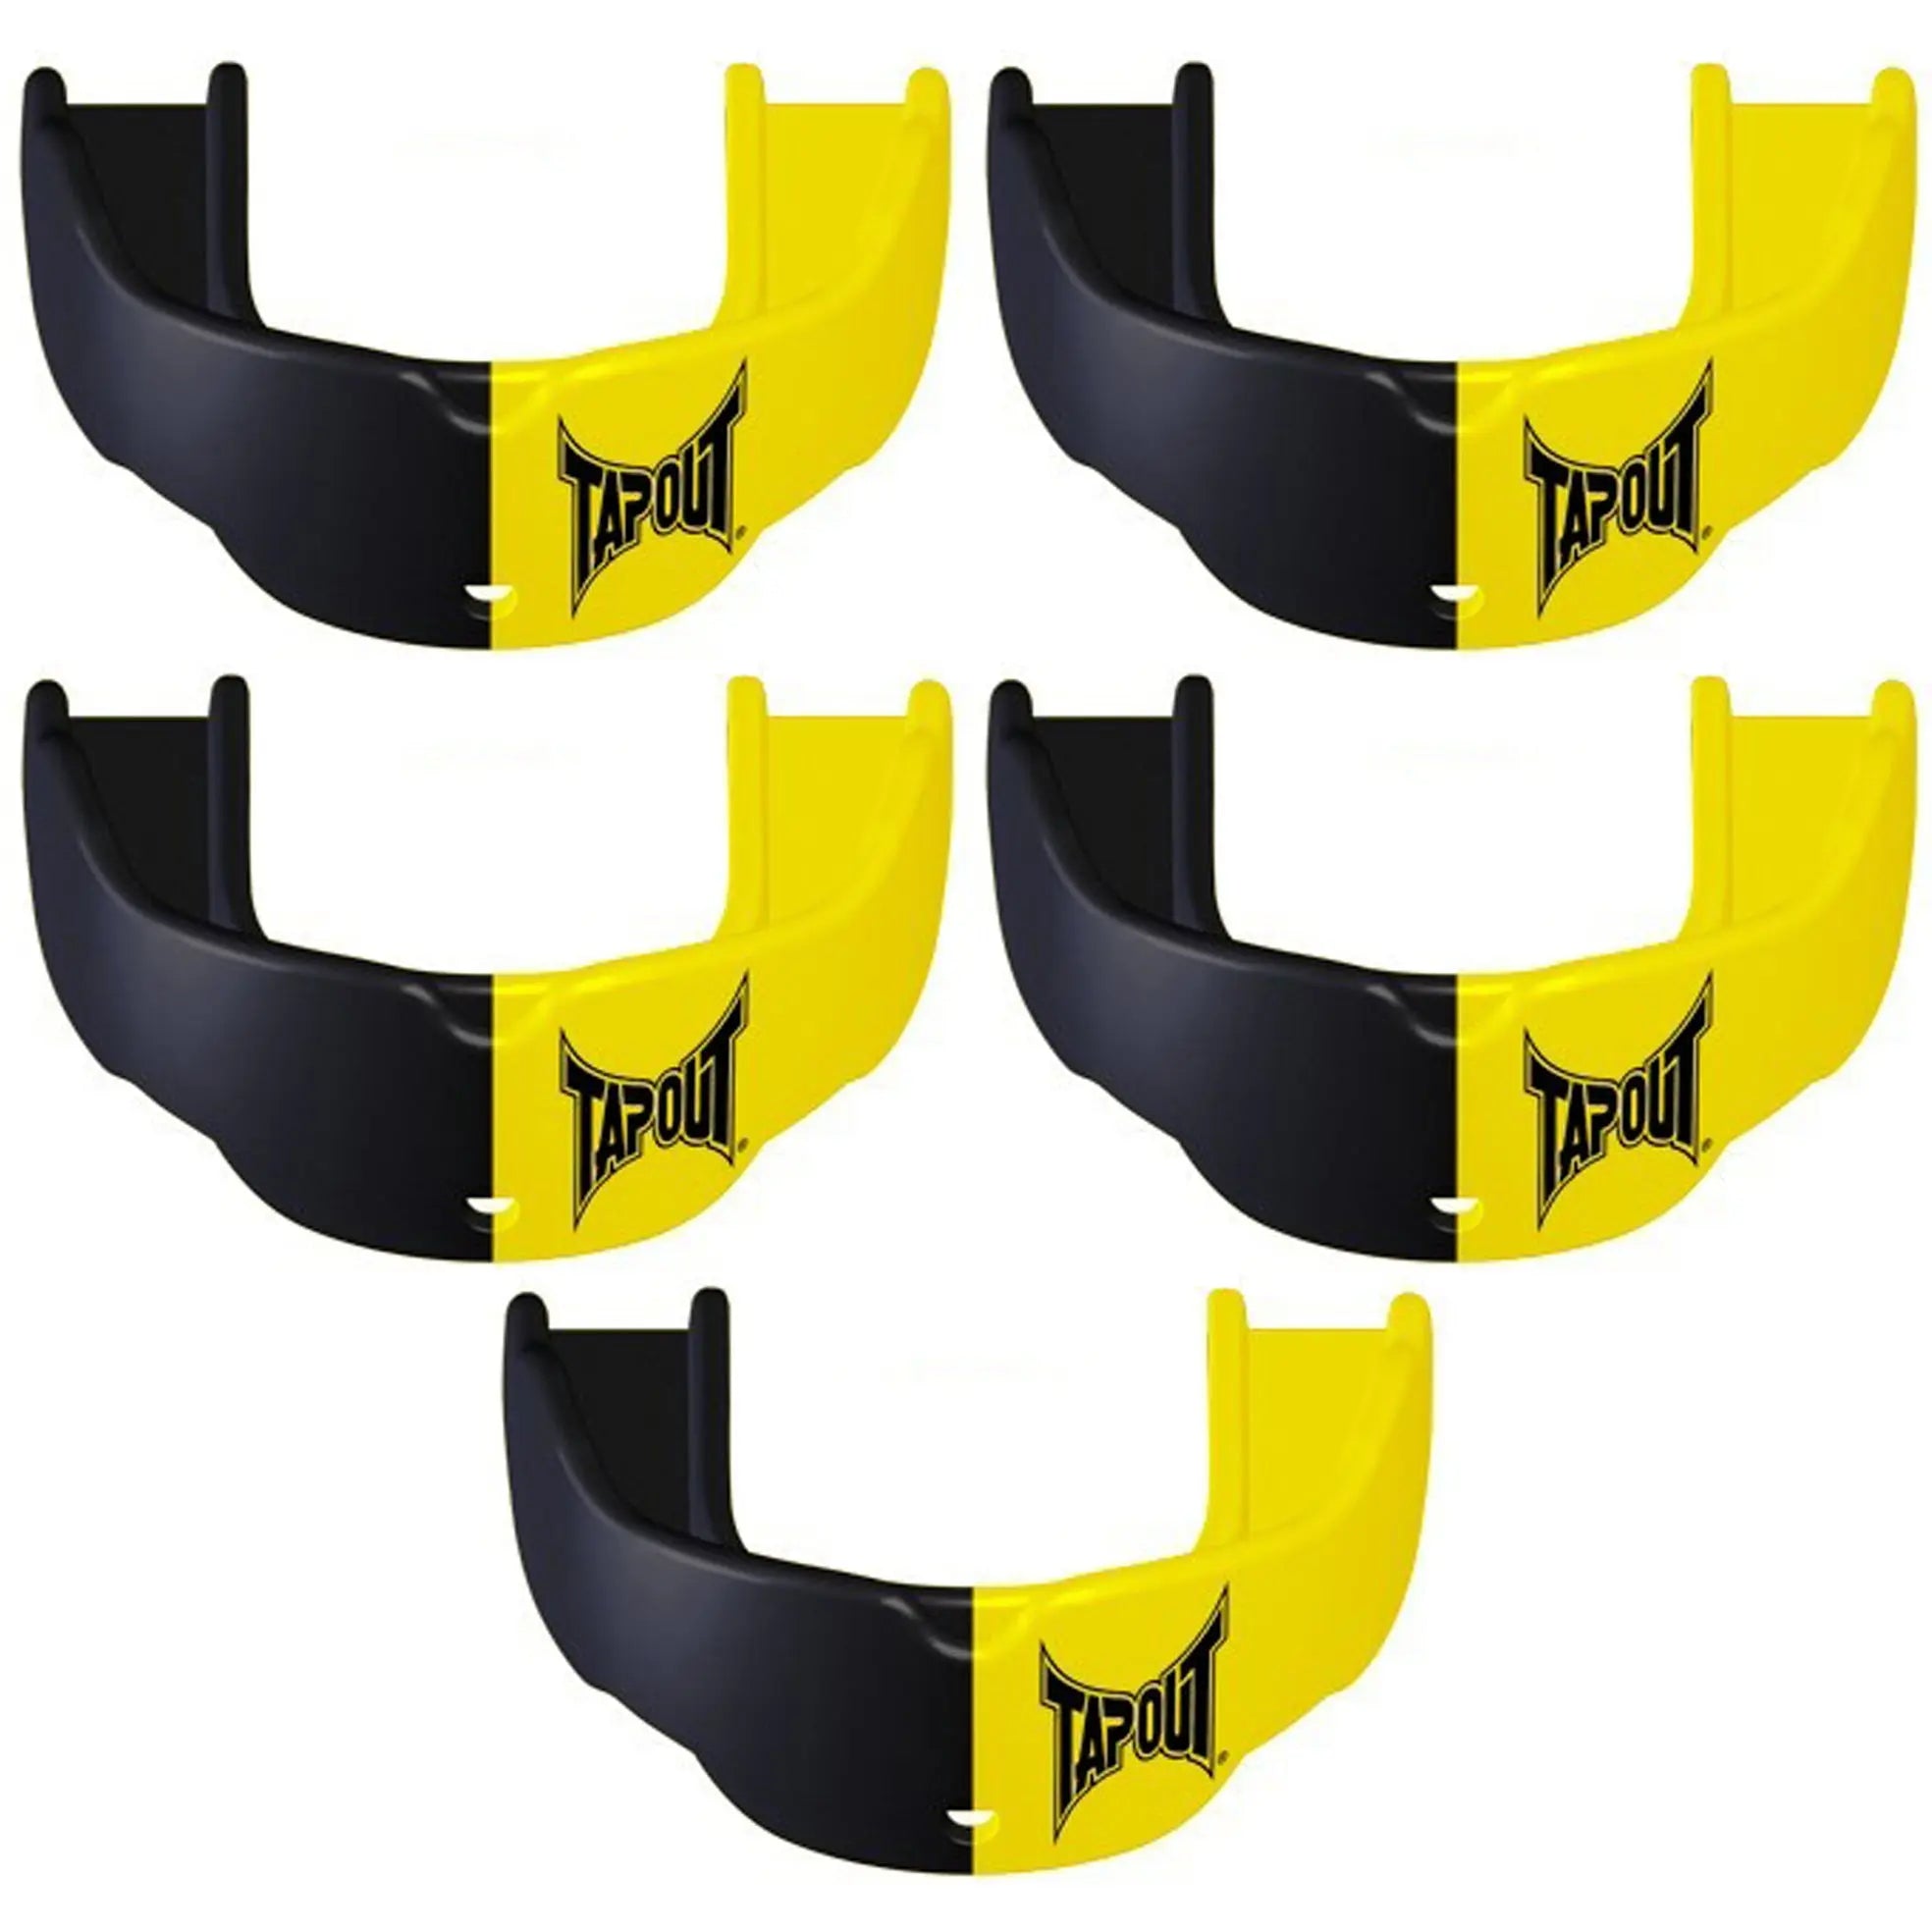 Tapout Adult Protective Sports Mouthguard with Strap 5-Pack - Yellow/Black Tapout